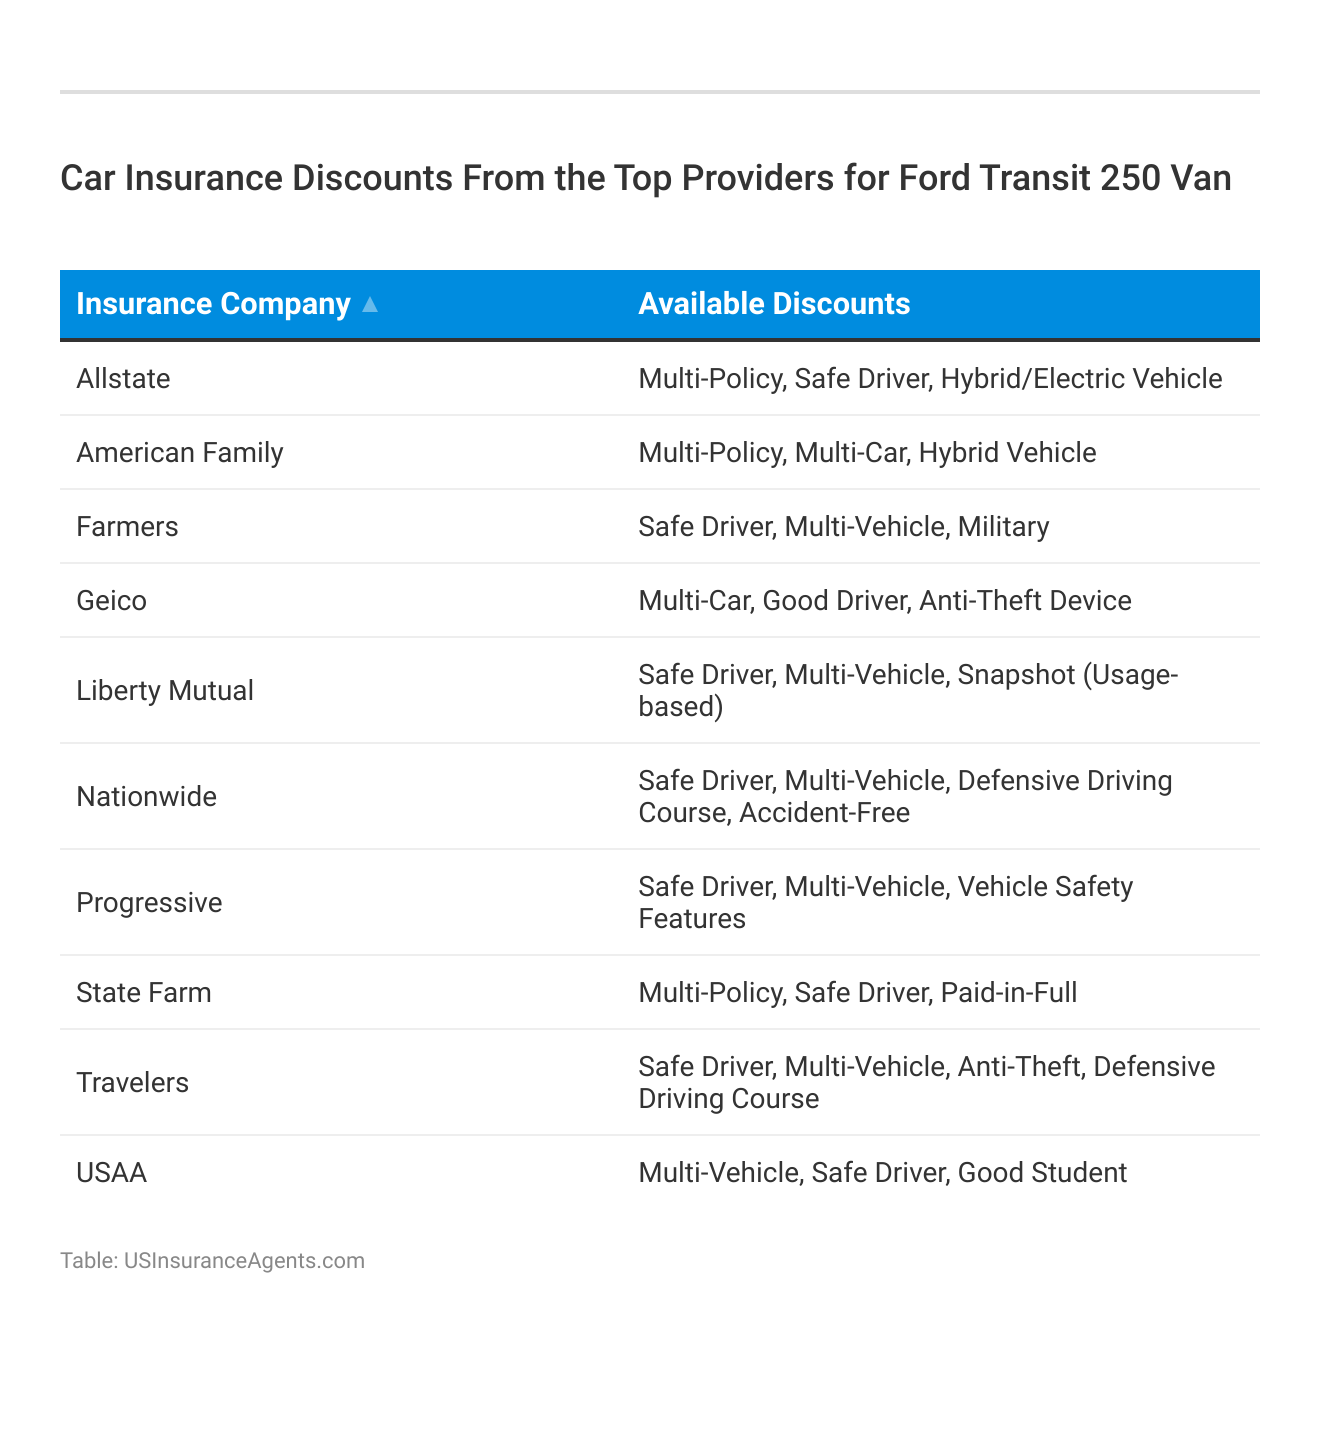 <h3>Car Insurance Discounts From the Top Providers for Ford Transit 250 Van</h3>